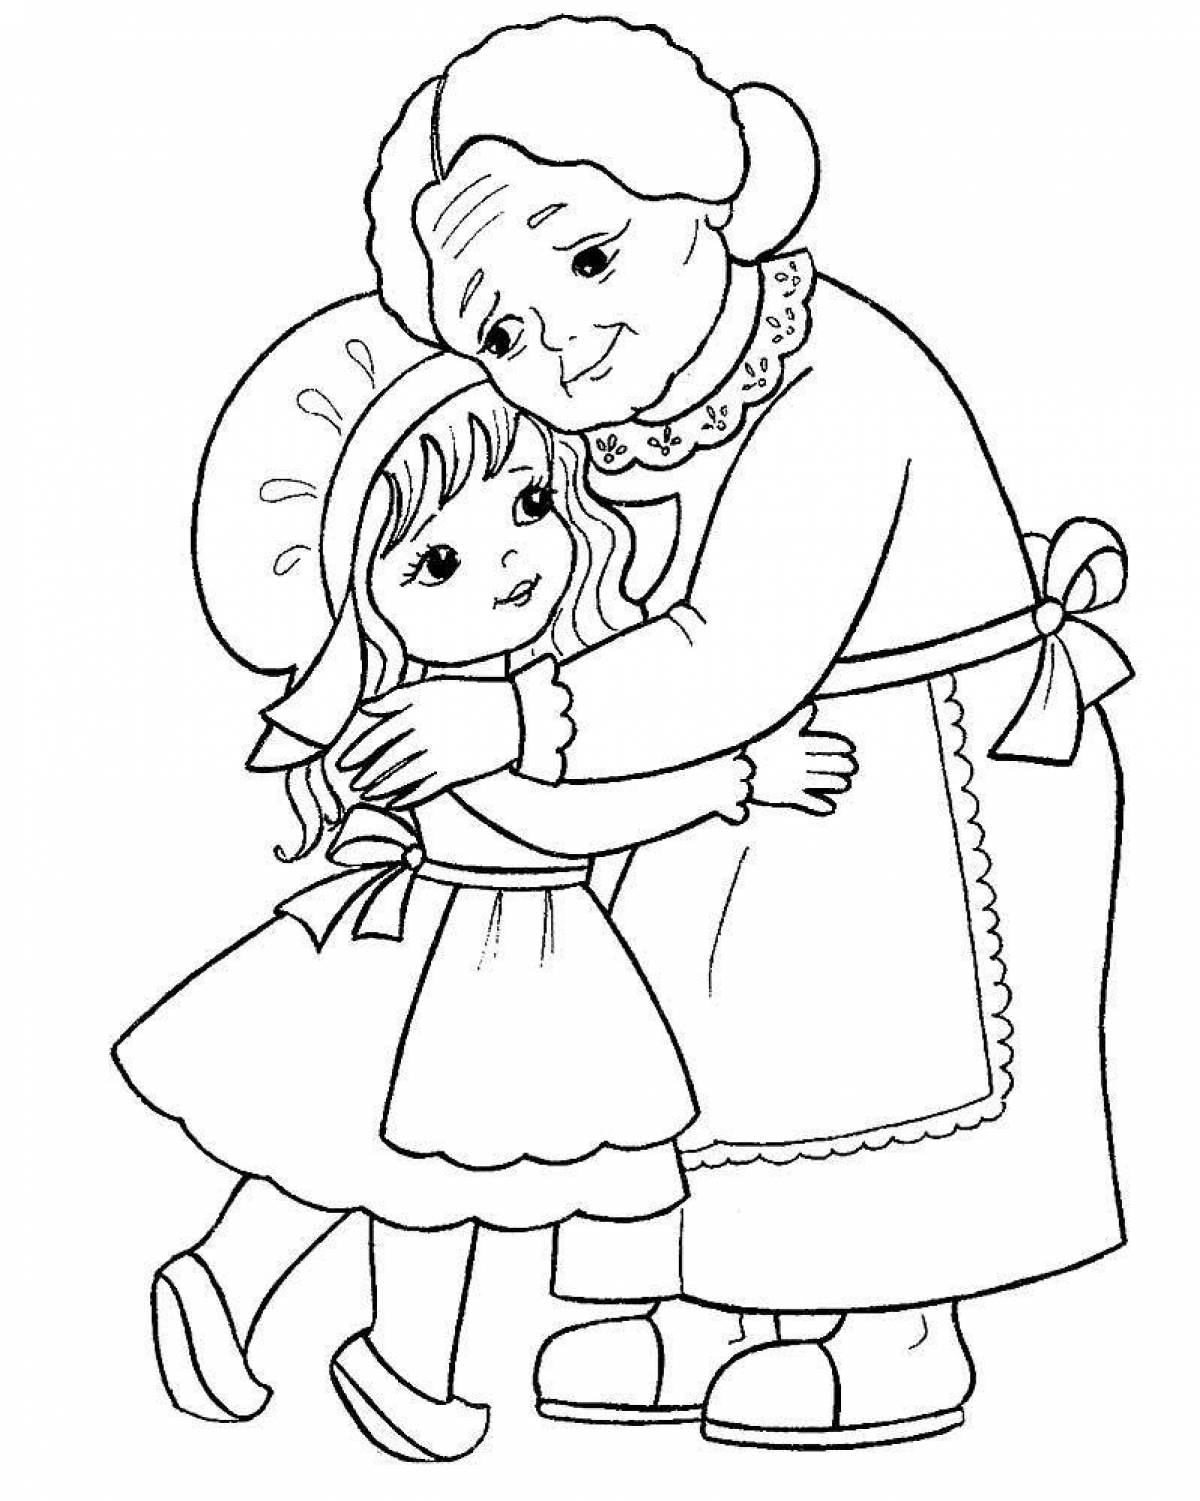 Coloring page cheerful grandmother and granddaughter